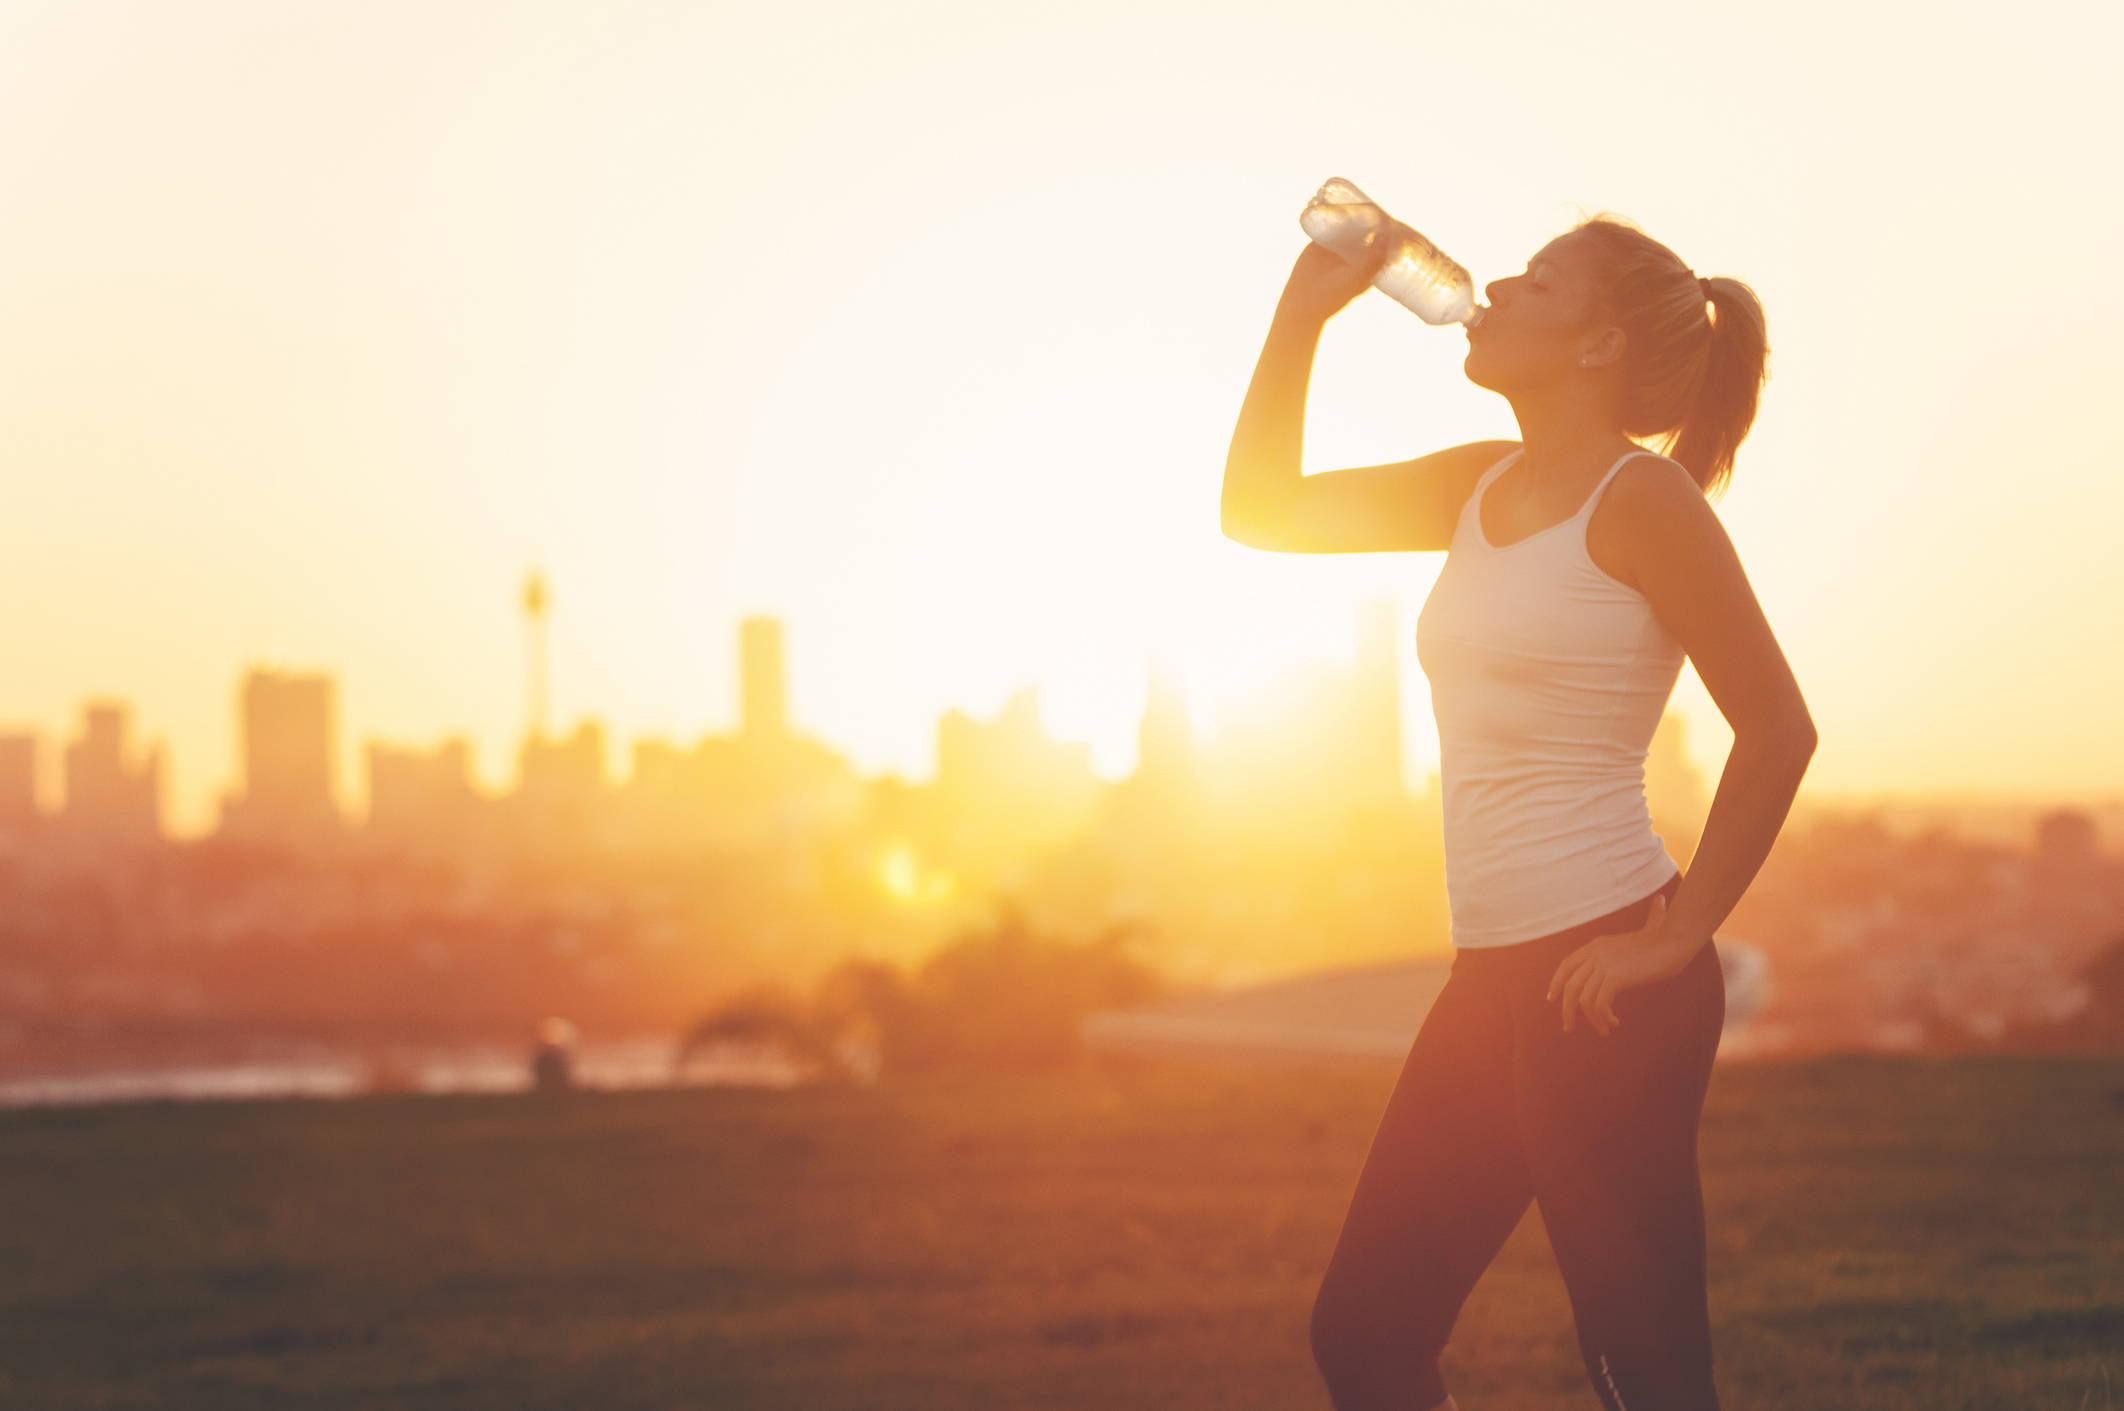 Silhouette of a woman drinking form a cold water bottle. She is exercising at sunset or sunrise. City of Sydney in the background. Copy space.